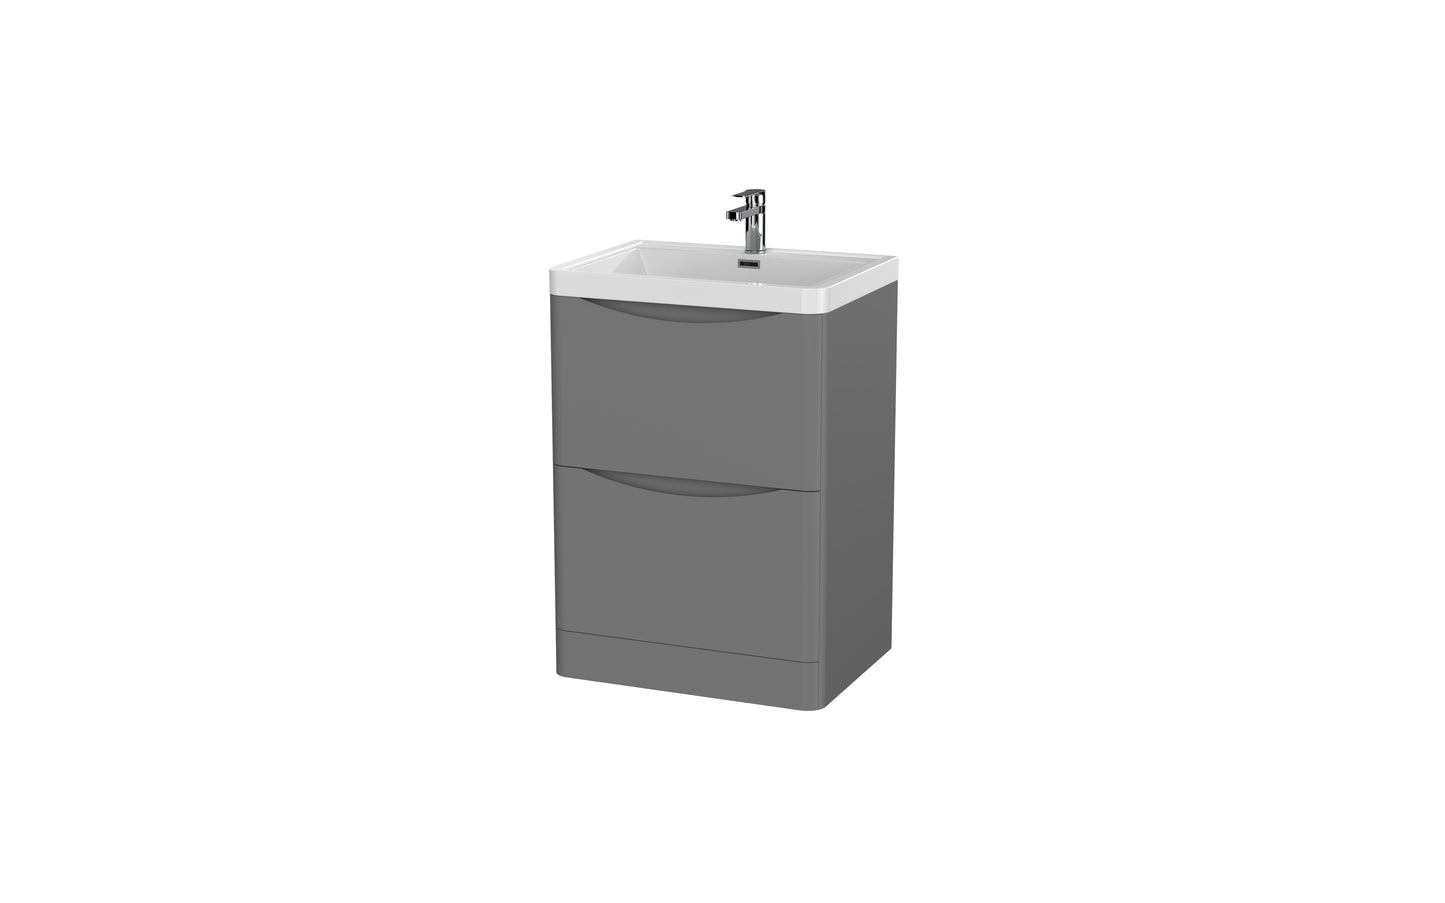 Aragon 600mm Handless Floor Cabinet with Basin. 2 Drawer Soft Close - Dust Grey